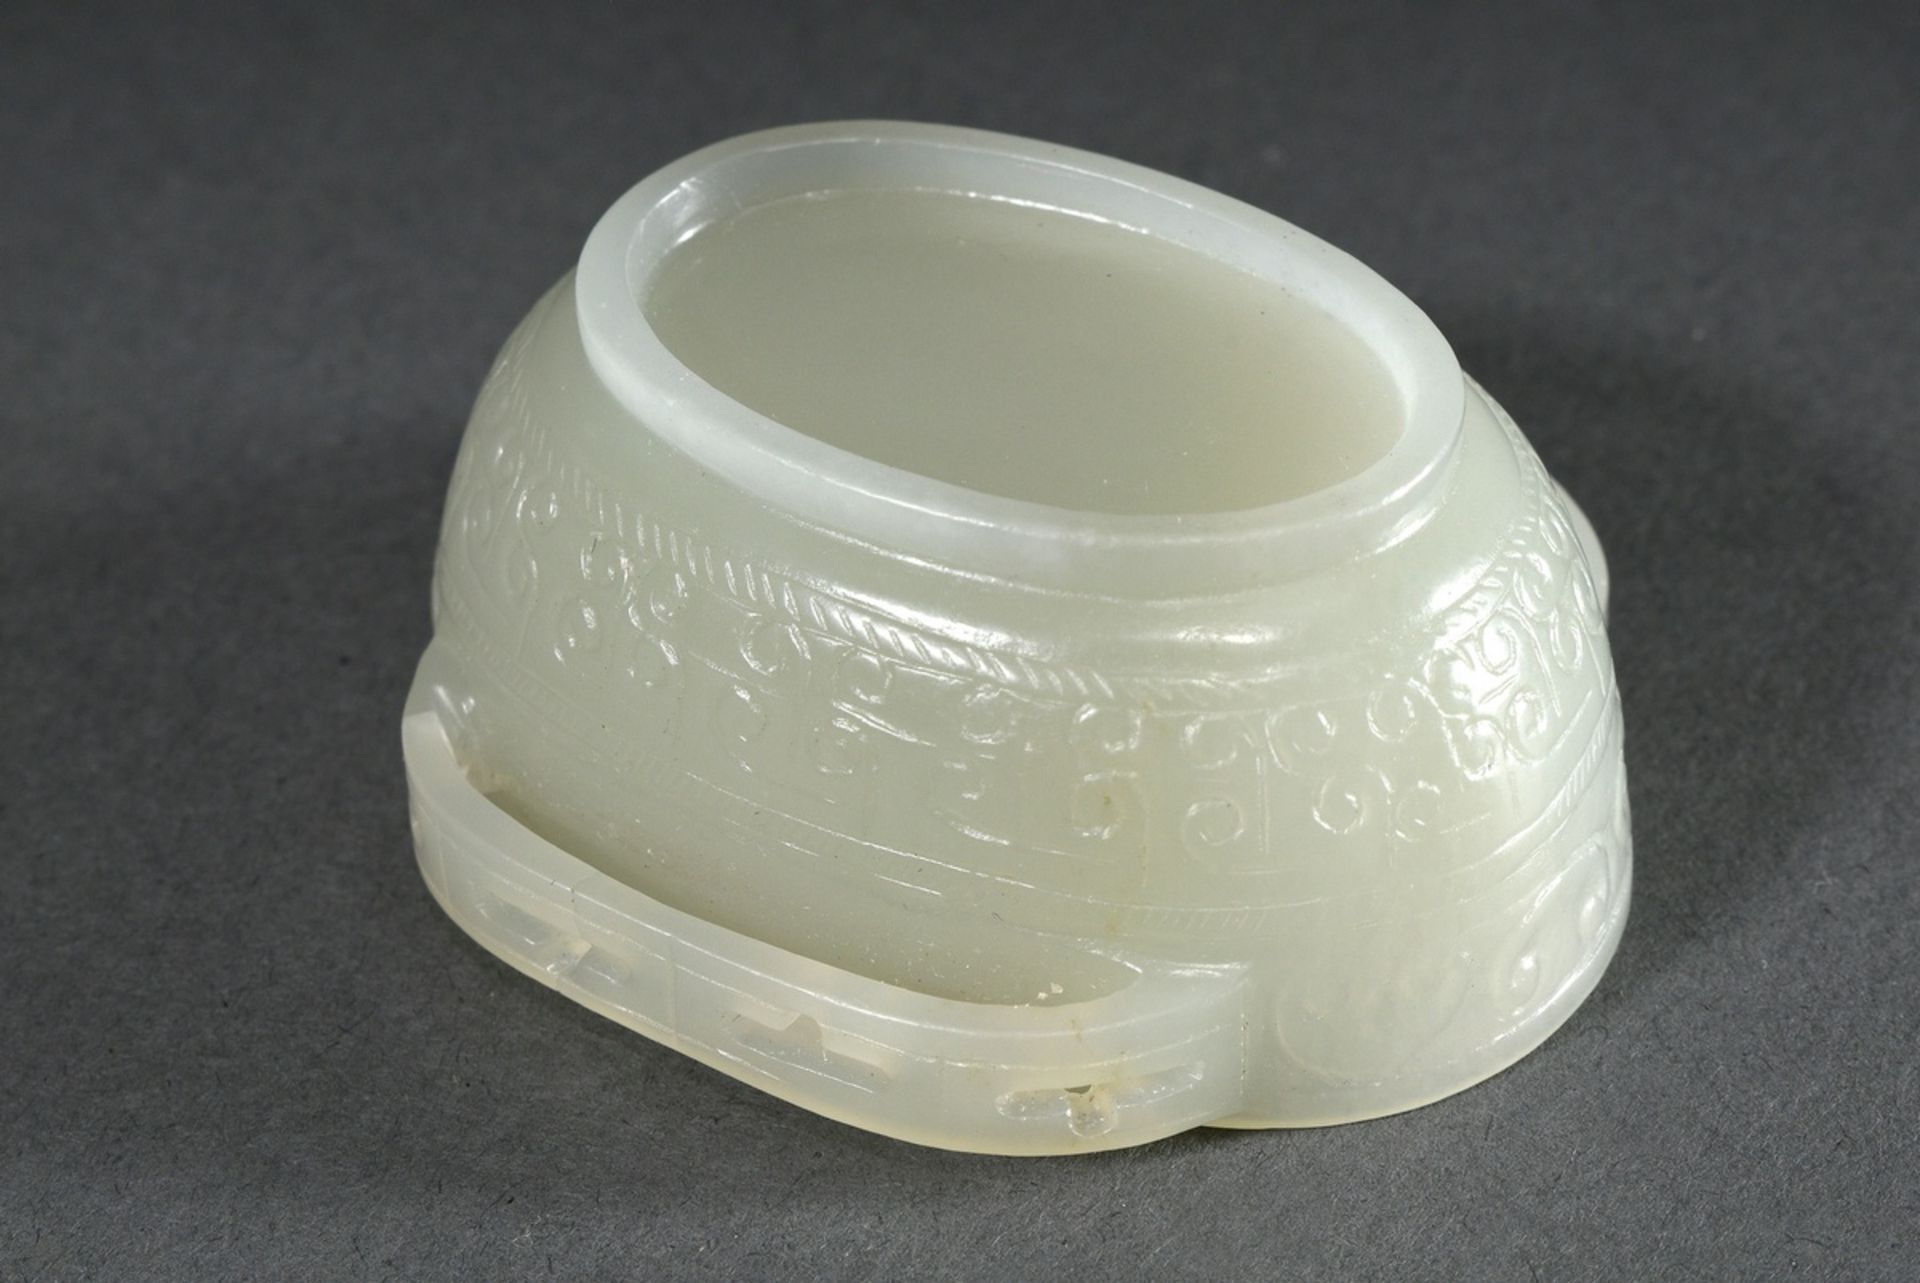 Seladon jade "ear bowl" in Han style with openwork handles and cut relief decoration in archaic sty - Image 3 of 4